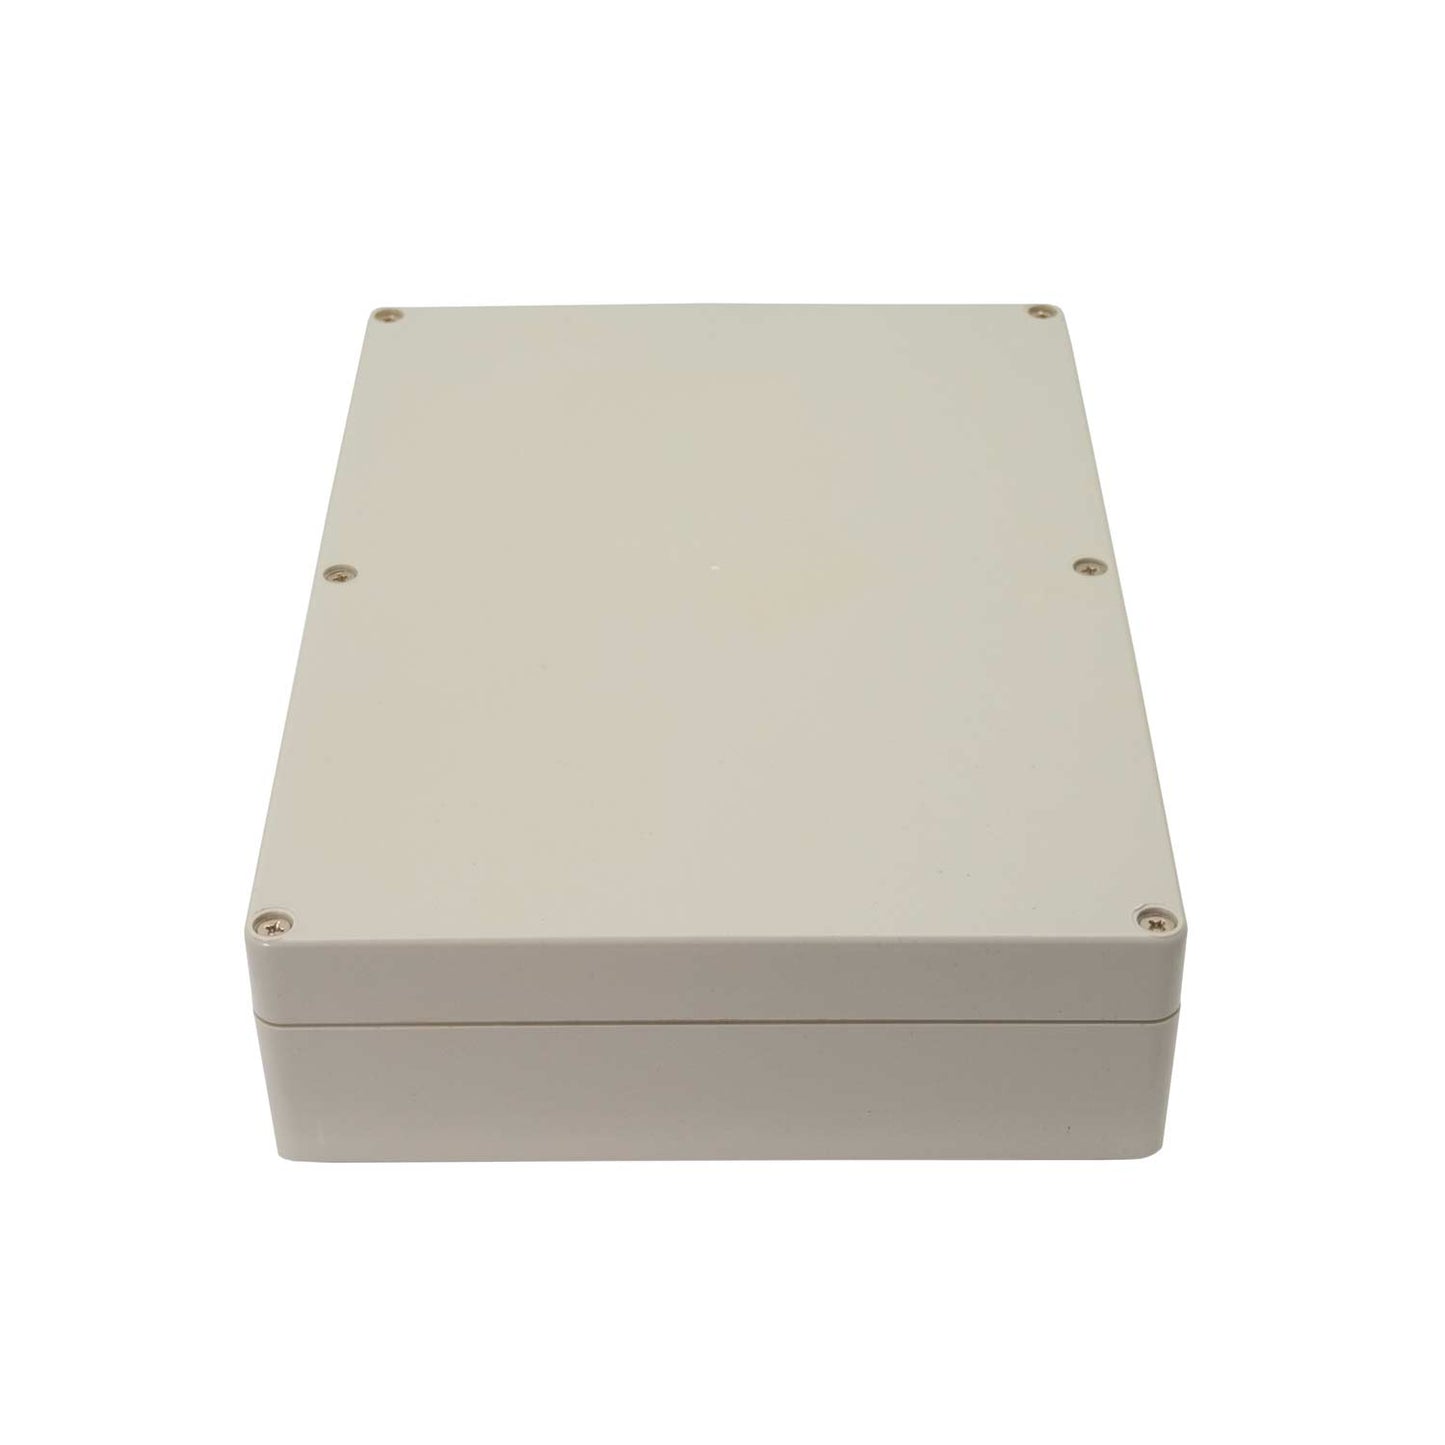 LeMotech Weatherproof ABS Plastic Junction Box for Universal Electrical Project Innovative Green